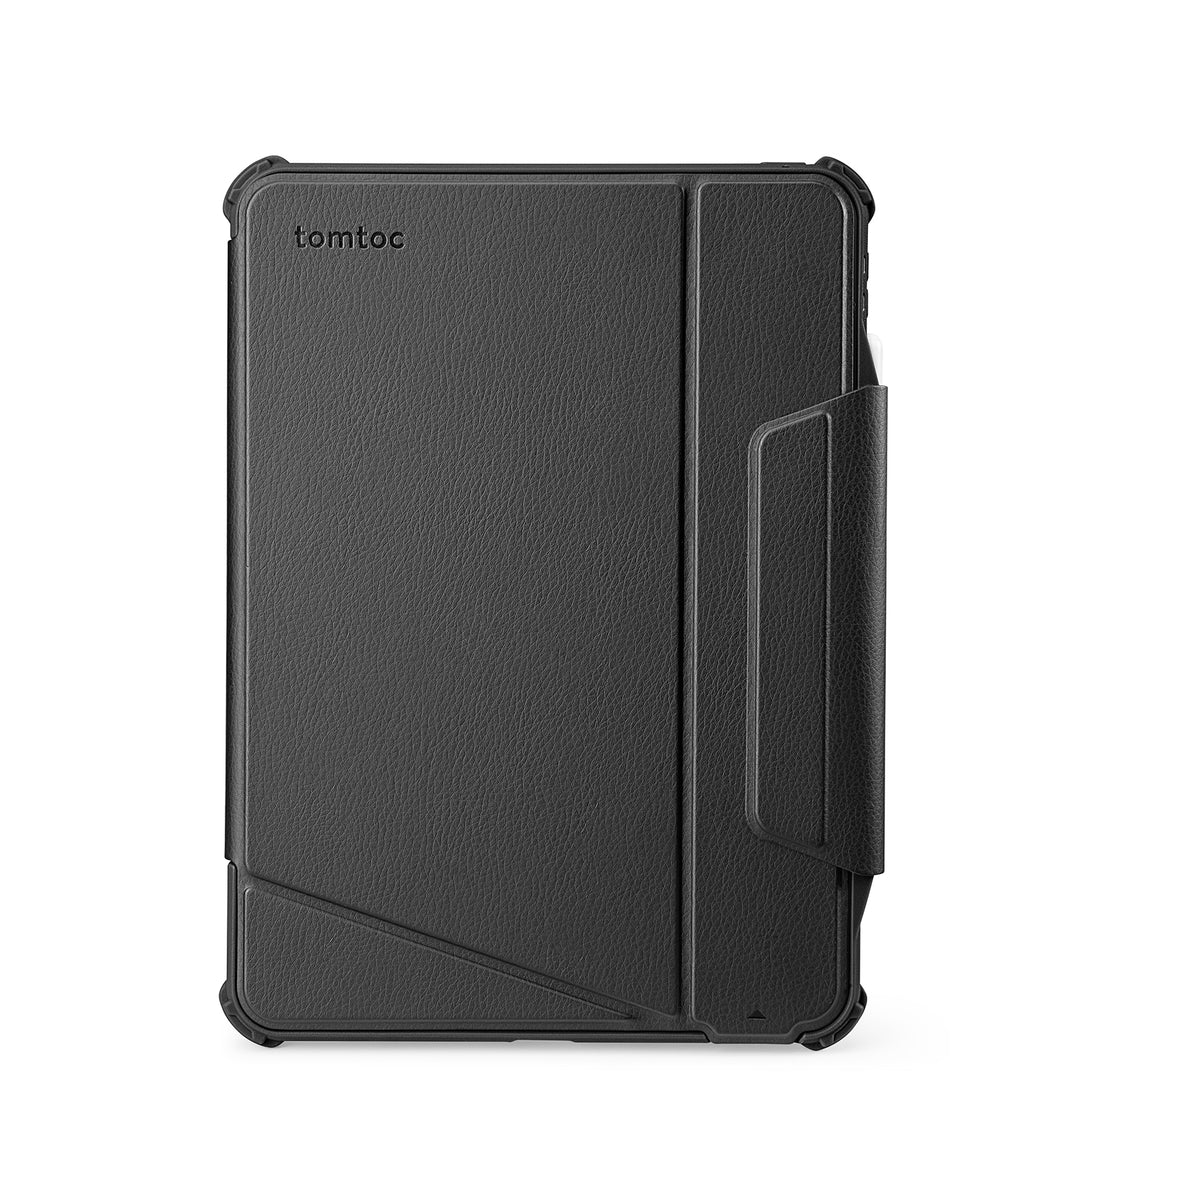 tomtoc 11 Inch iPad Pro Wireless Apple Pencil Charging / Detachable Protective Case - Leather Black